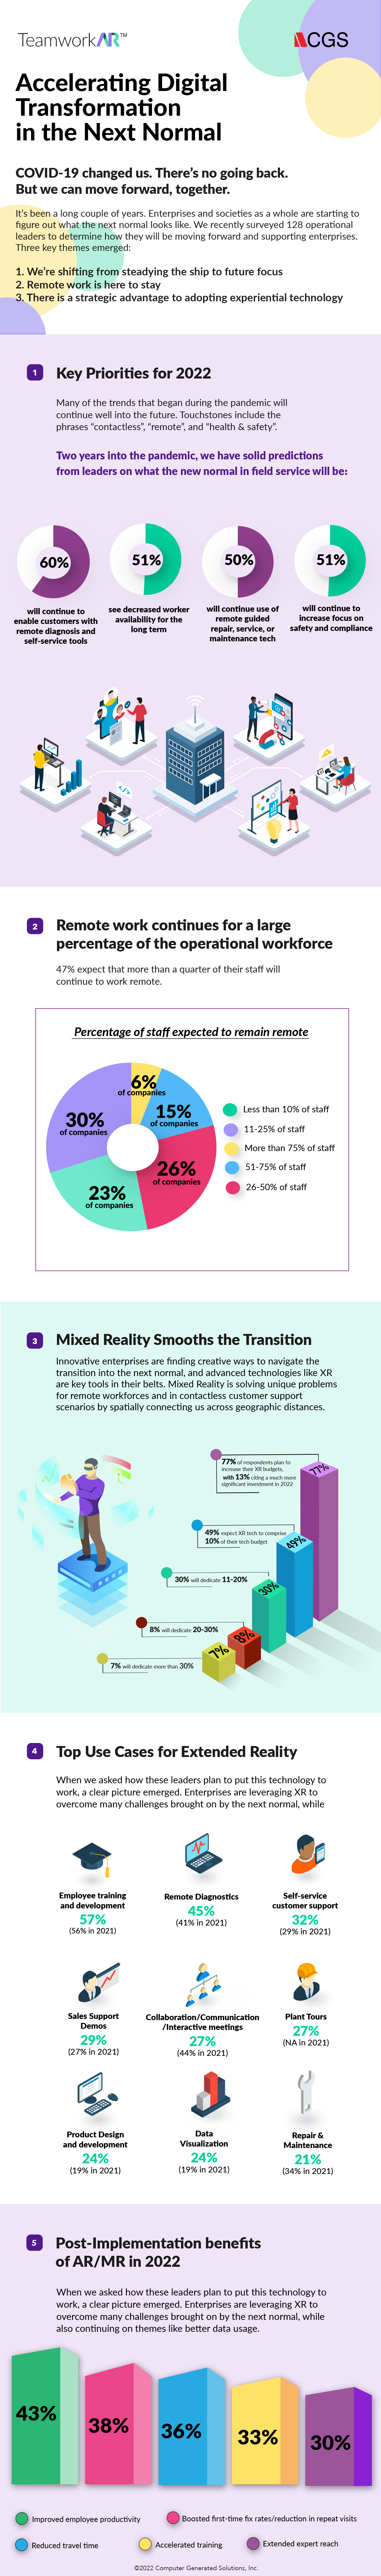 TeamworkAR infographic: Accelerating Digital Transformation in the Next Normal